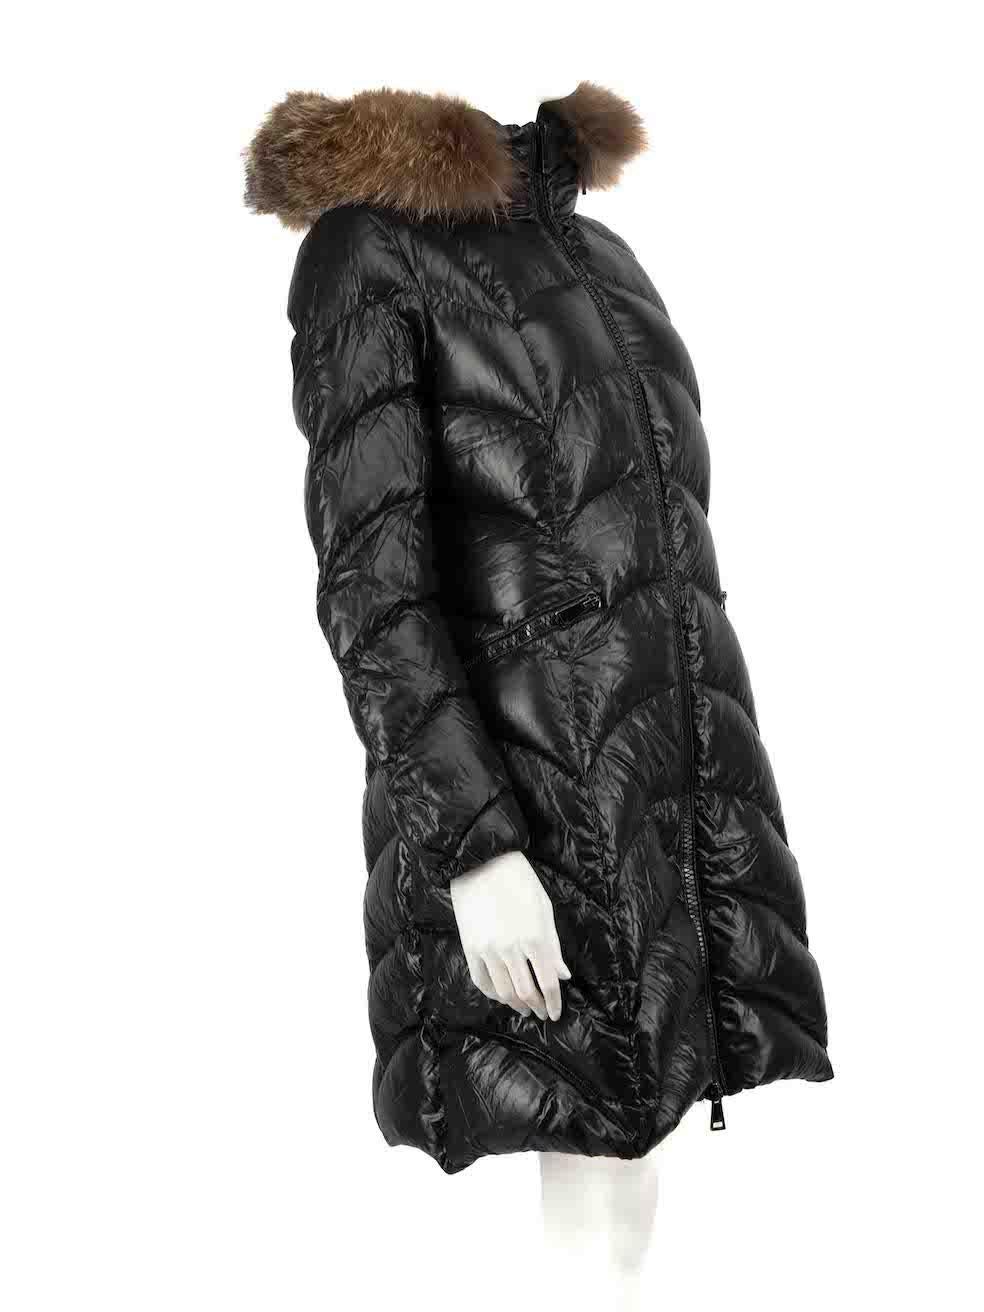 CONDITION is Very good. Minimal wear to coat is evident. Minimal wear to the zip hardware with scratches to the metal and the brand label at the sleeve has slight discolouration on this used Moncler designer resale item.
 
 
 
 Details
 
 
 Albizia